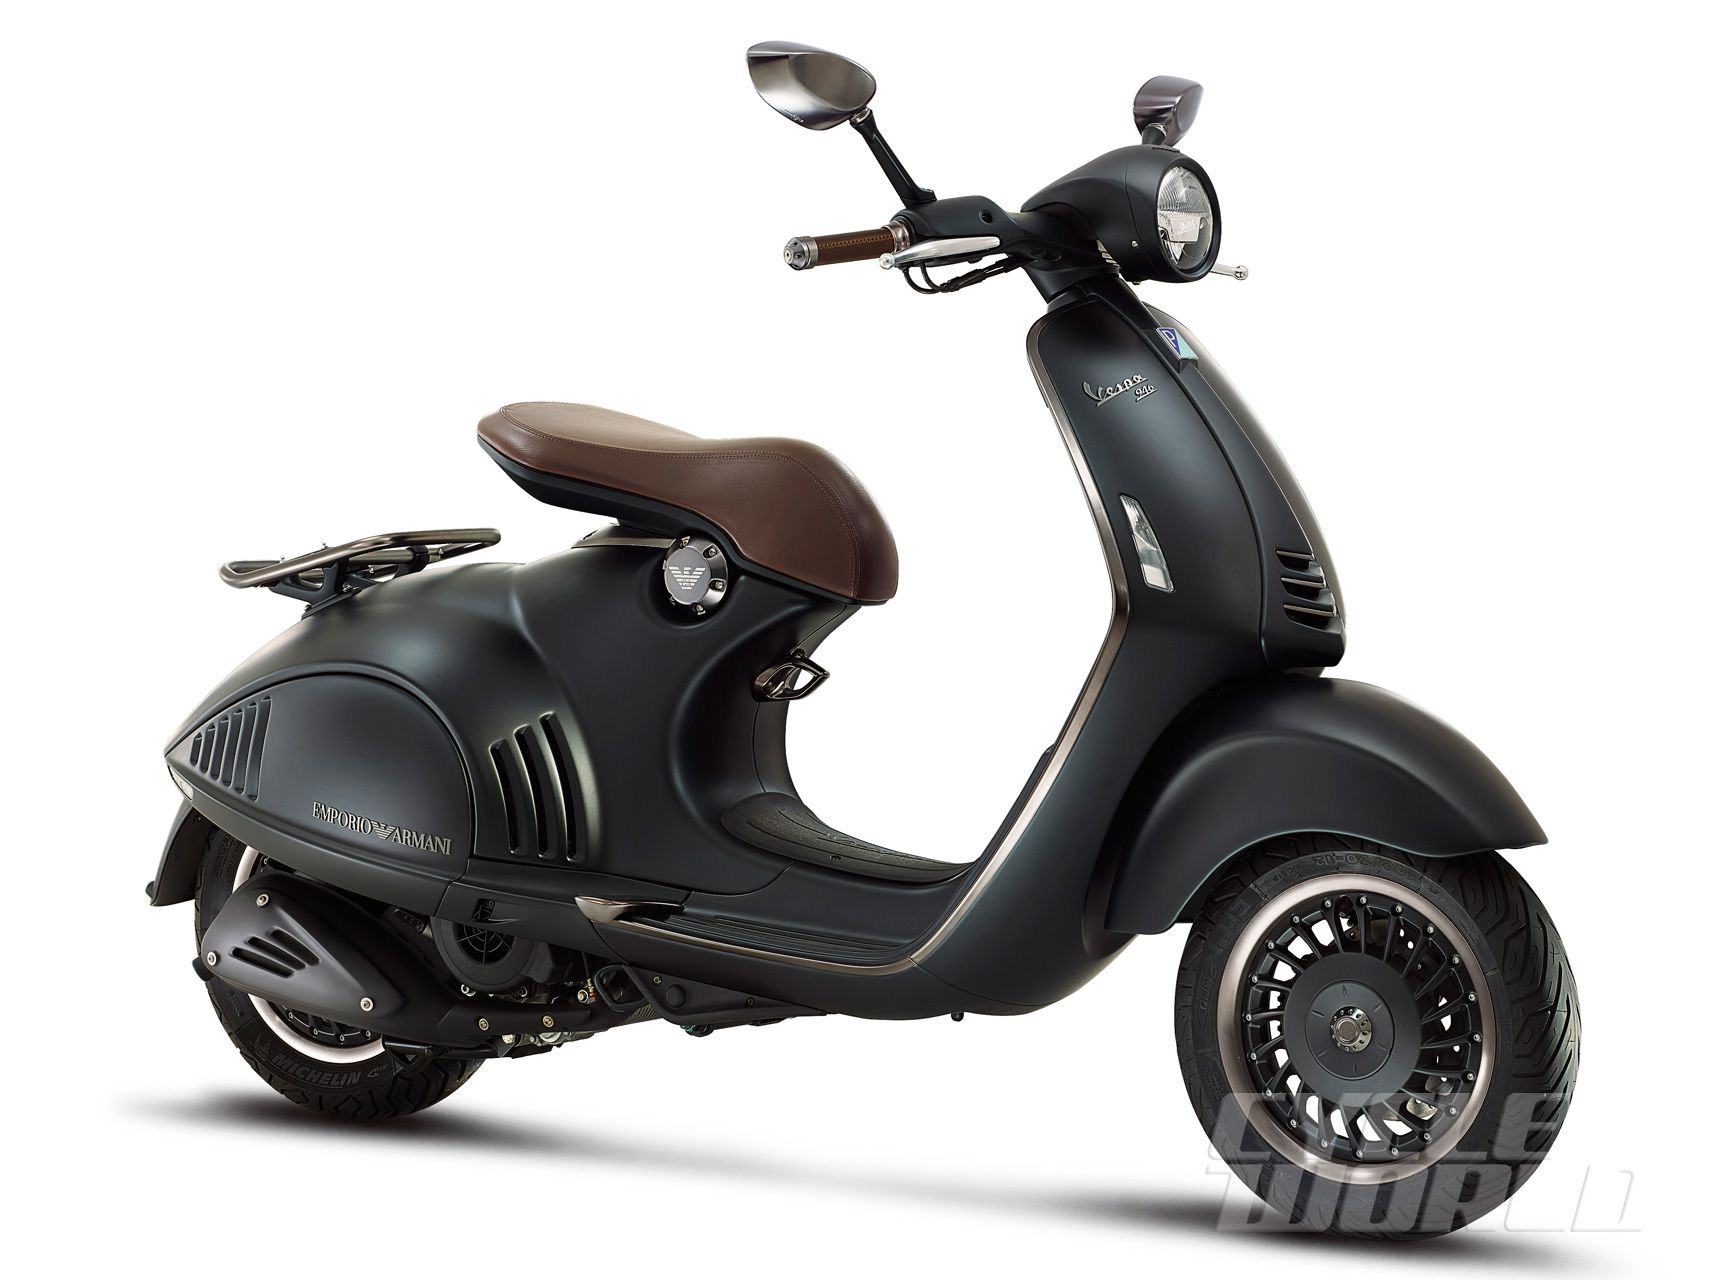 Vespa 946 Emporio Armani FIRST LOOK Scooter Review- Photos